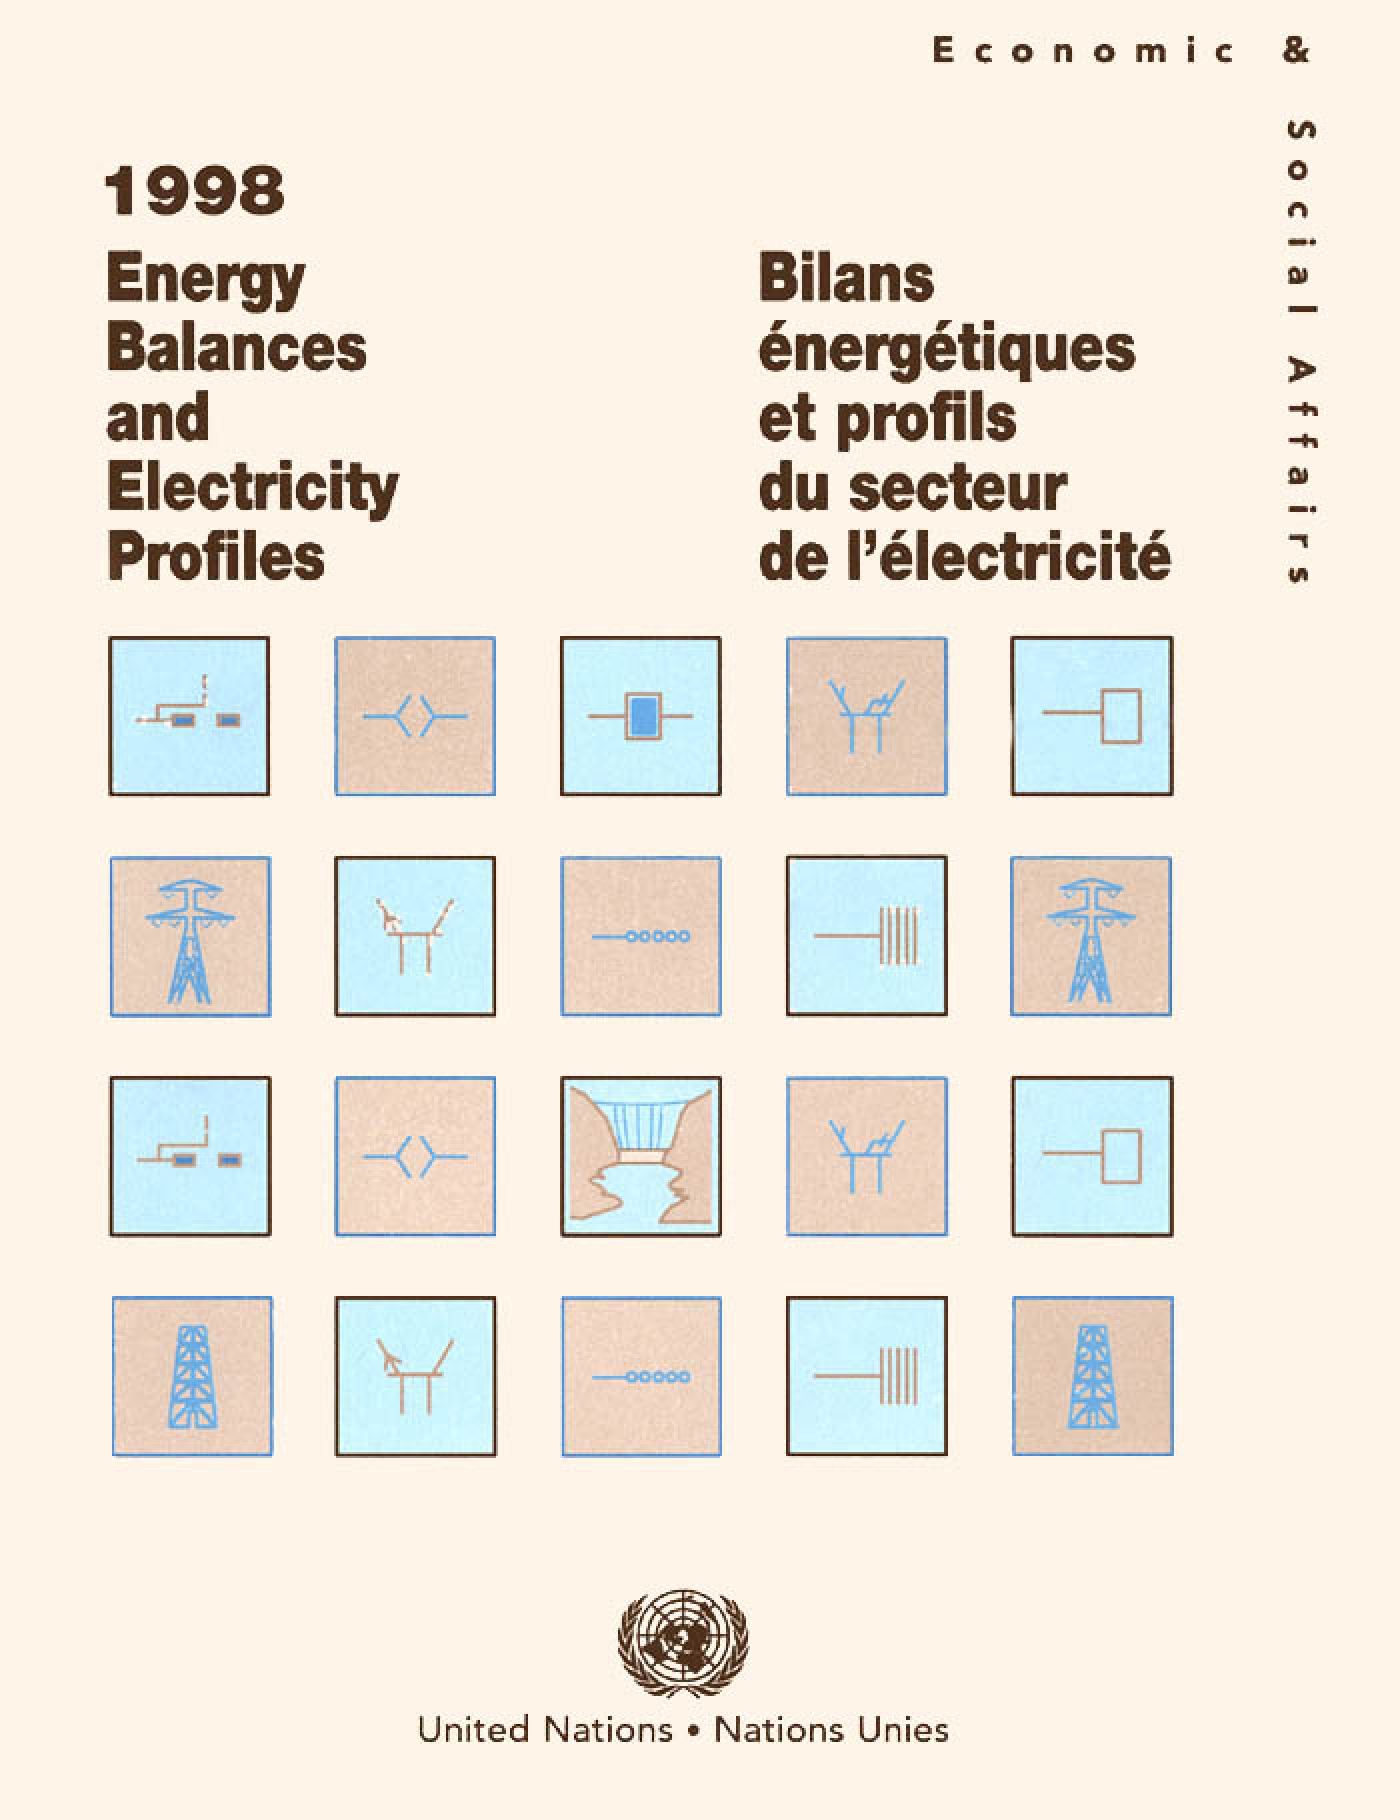 image of Energy Balances and Electricity Profiles 1998